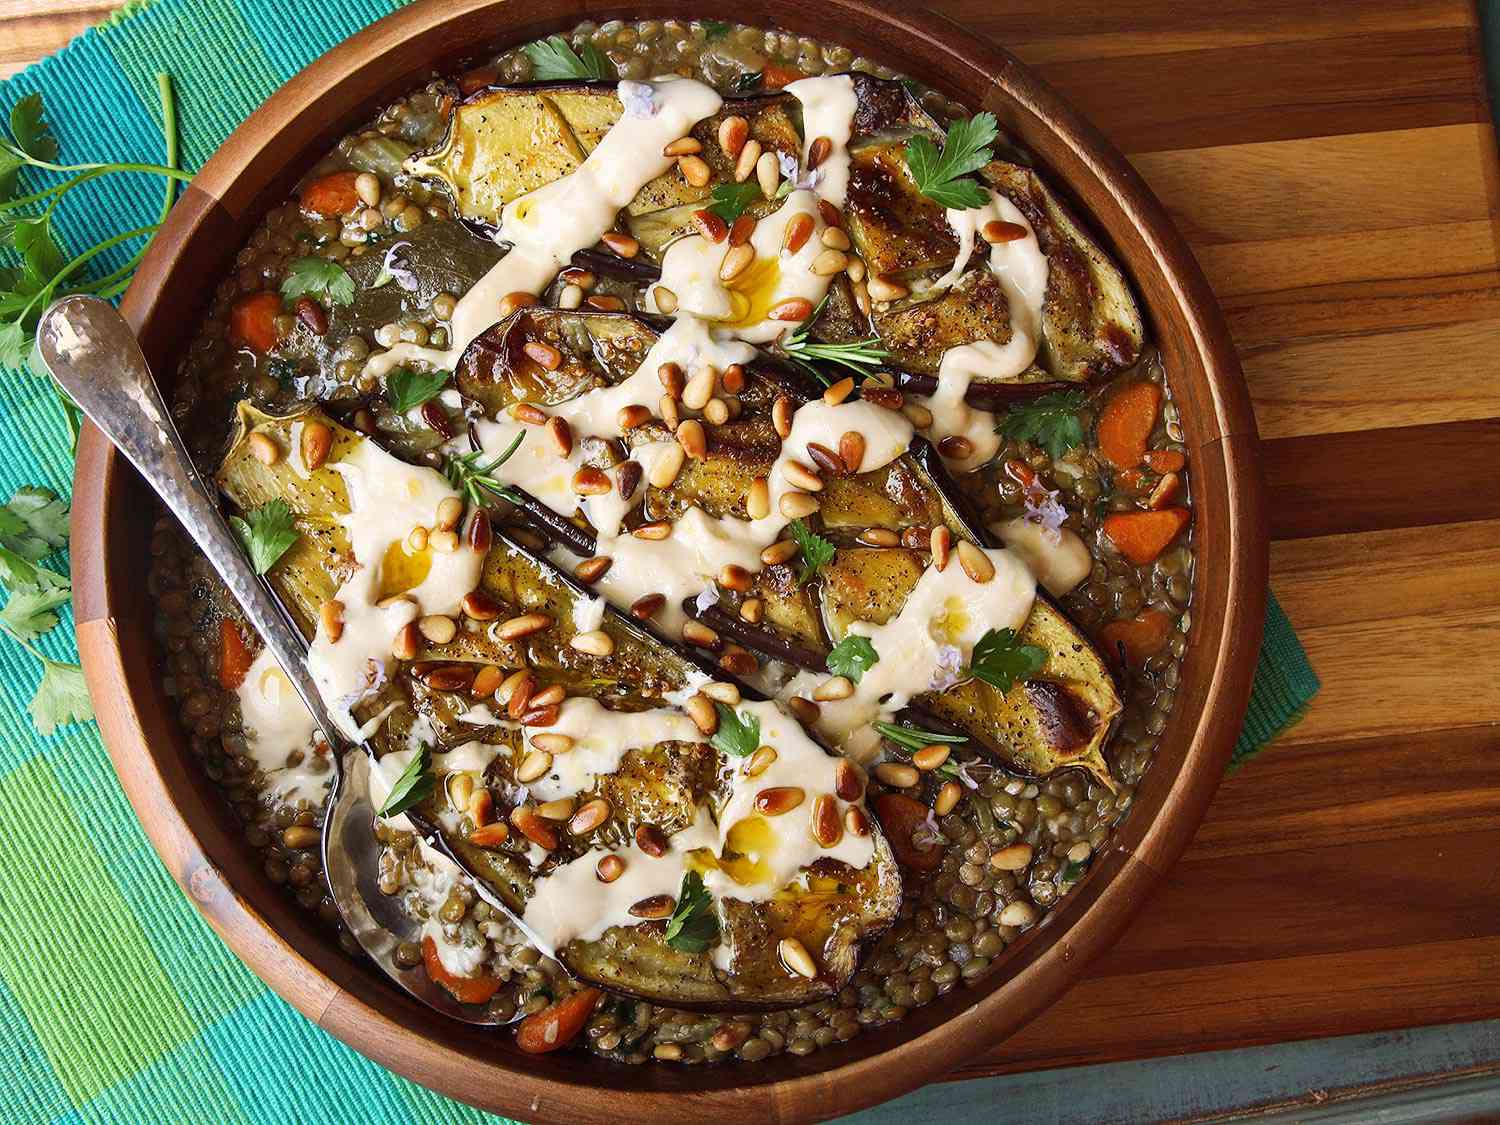 Overhead shot of a serving bowl of roasted eggplant on a bed of lentil stew topped with cream tahini, toasted pine nuts, and chopped herbs